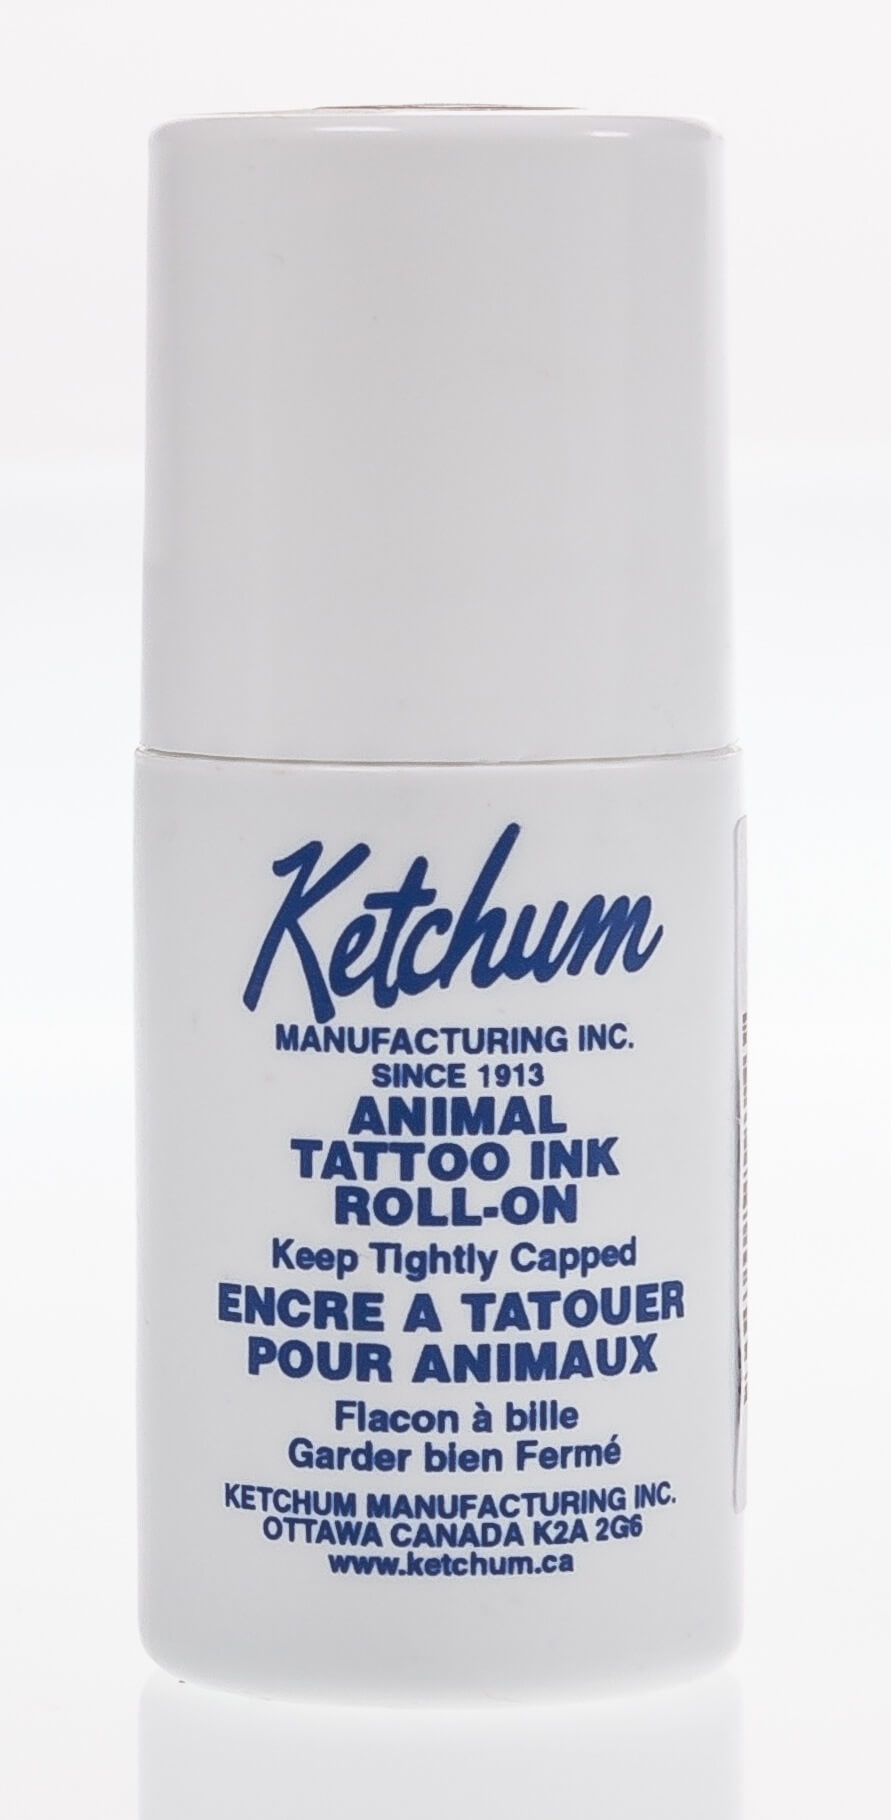 Contact Us | Vegan Tattoo Ink Sets | World Famous Tattoo Ink